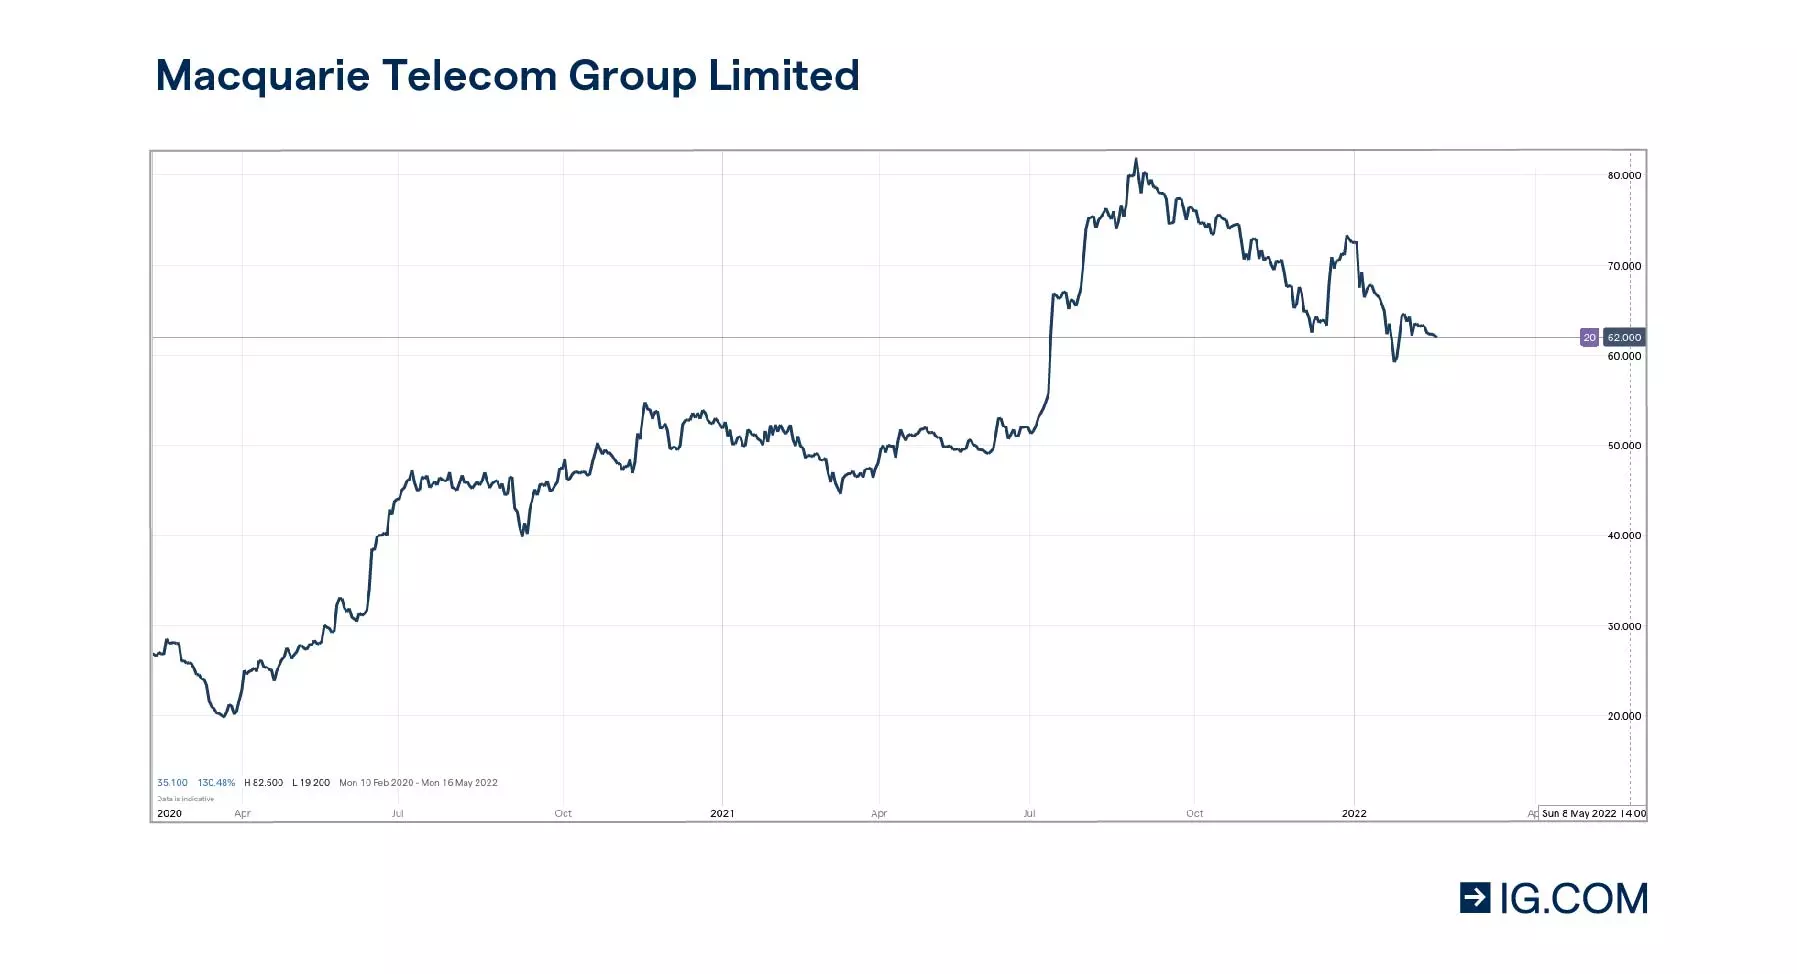 Macquarie Telecom price chart showing how the share price made a steady incline from $19.20 at the beginning of the pandemic to $63.40 in Q1 FY22.